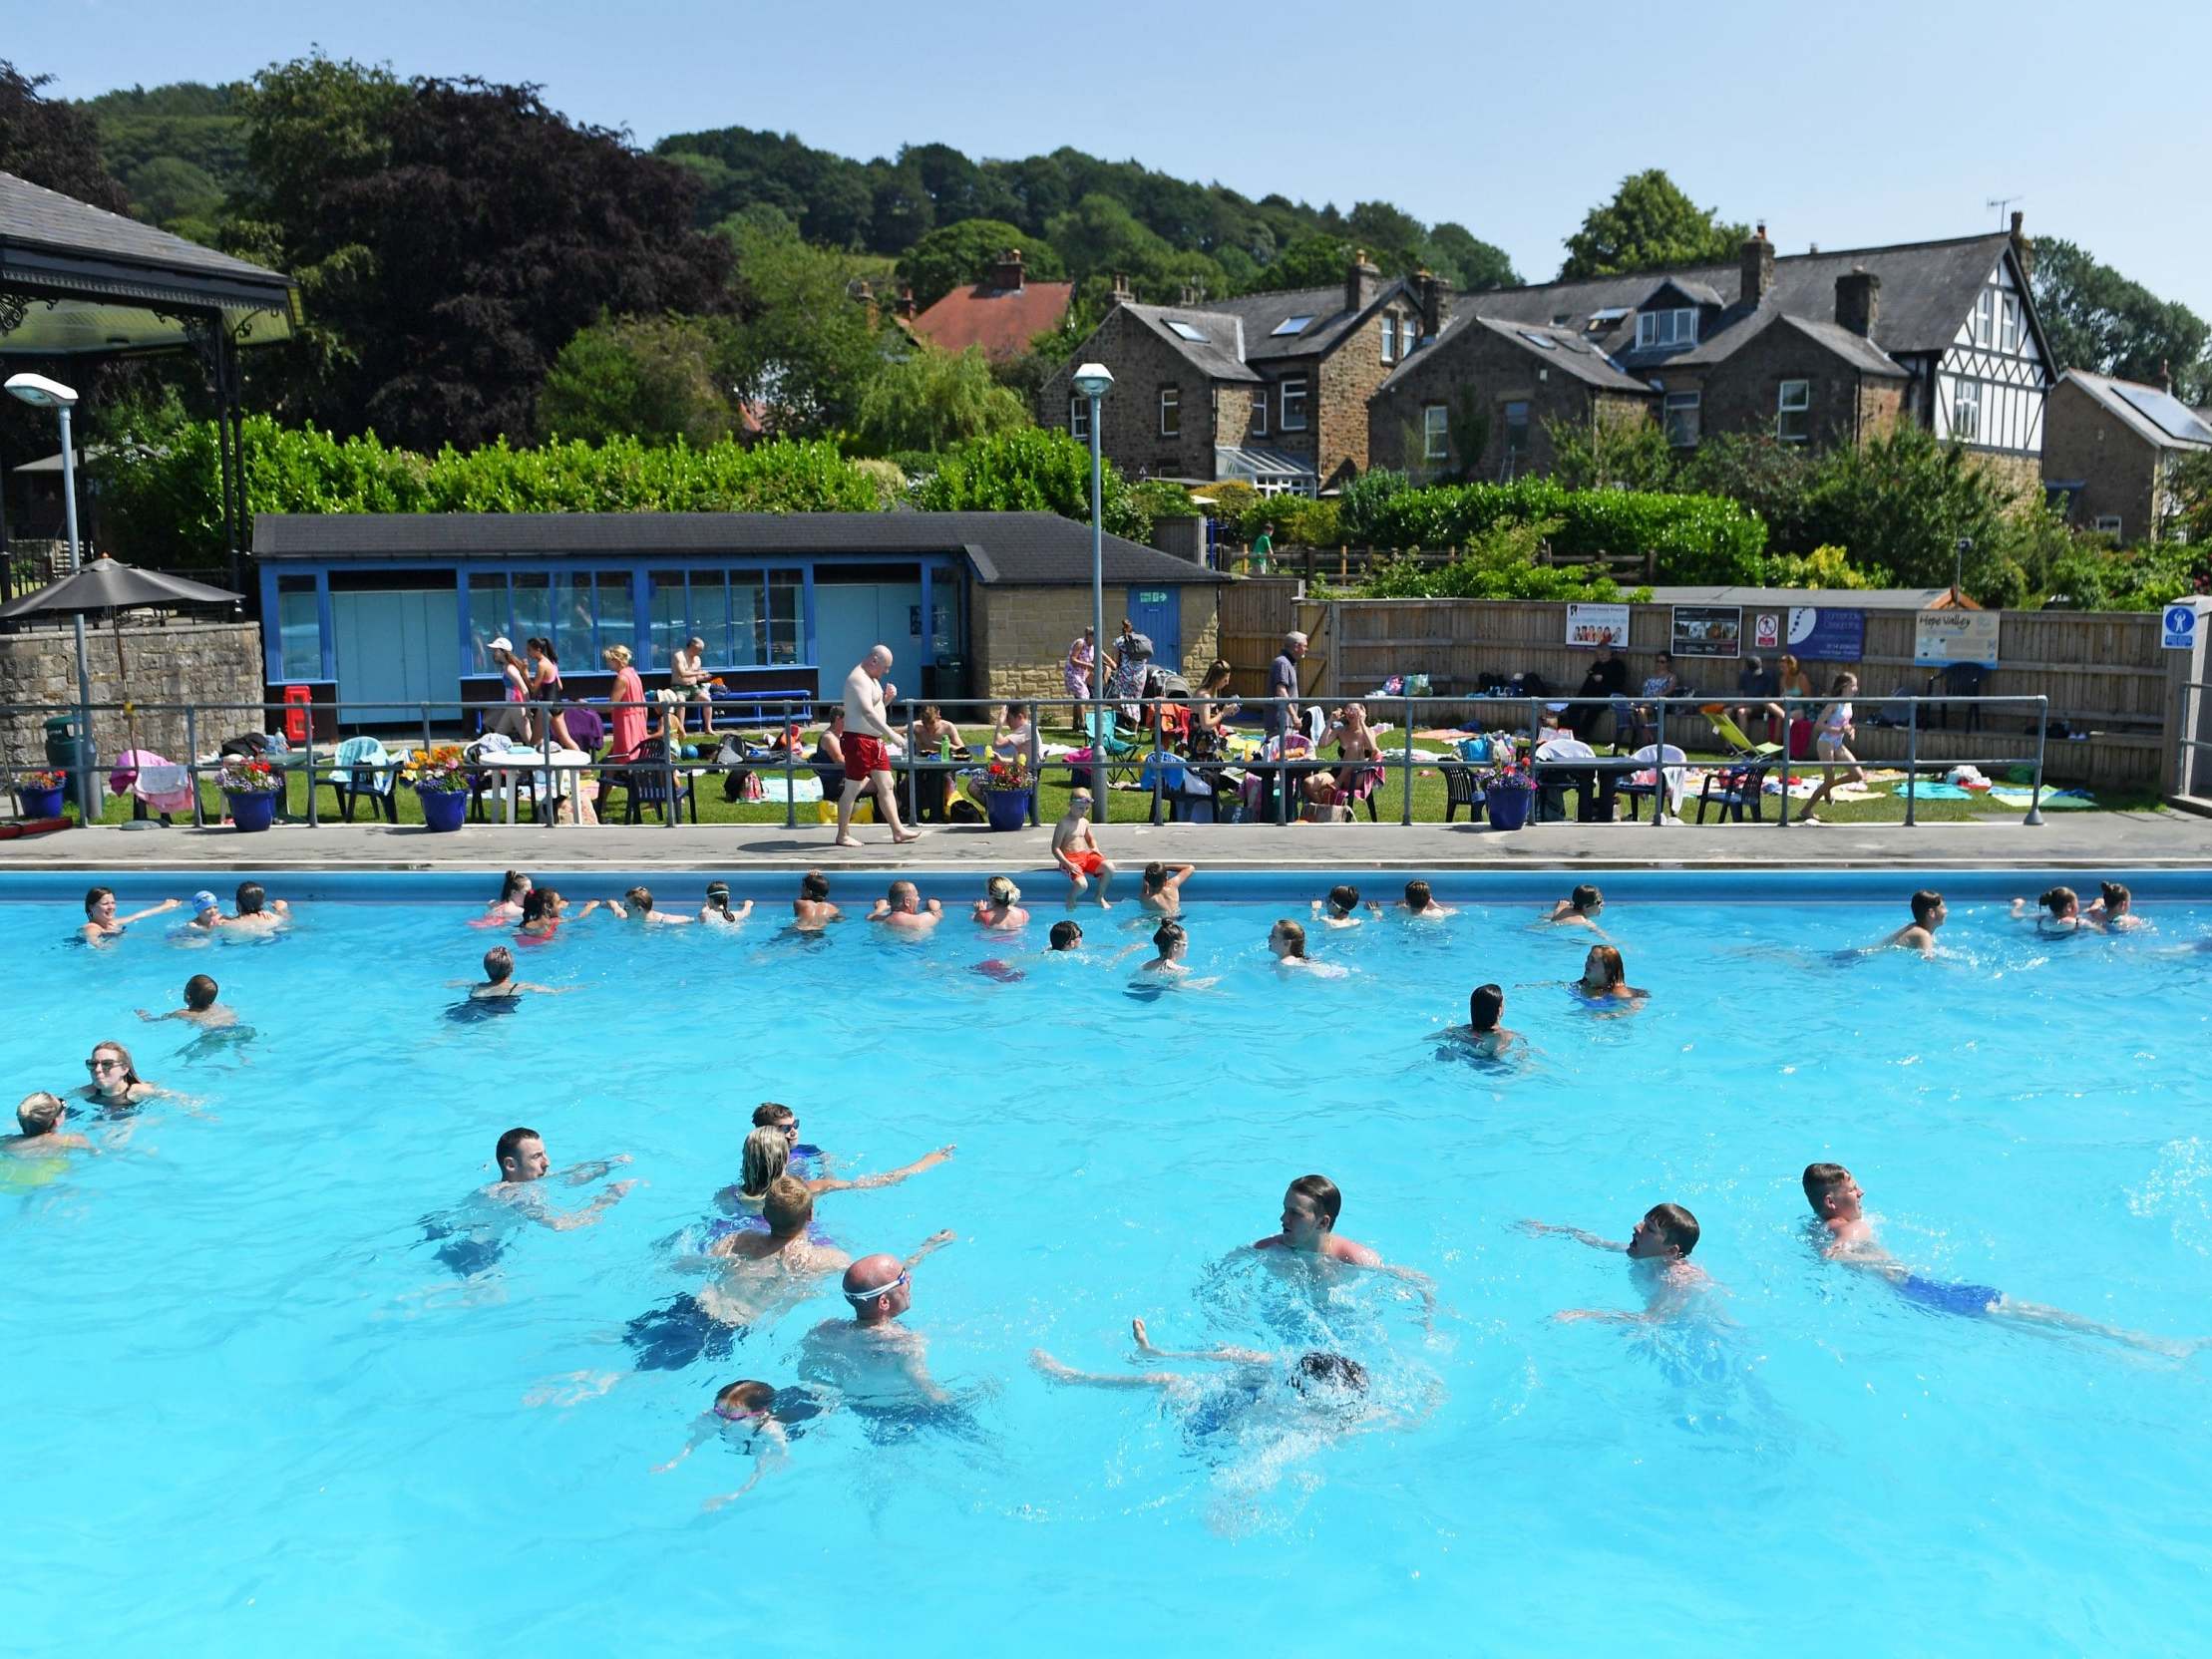 UK heatwave: 500 people try to storm lido as tempers flare amid 37C in  London, The Independent